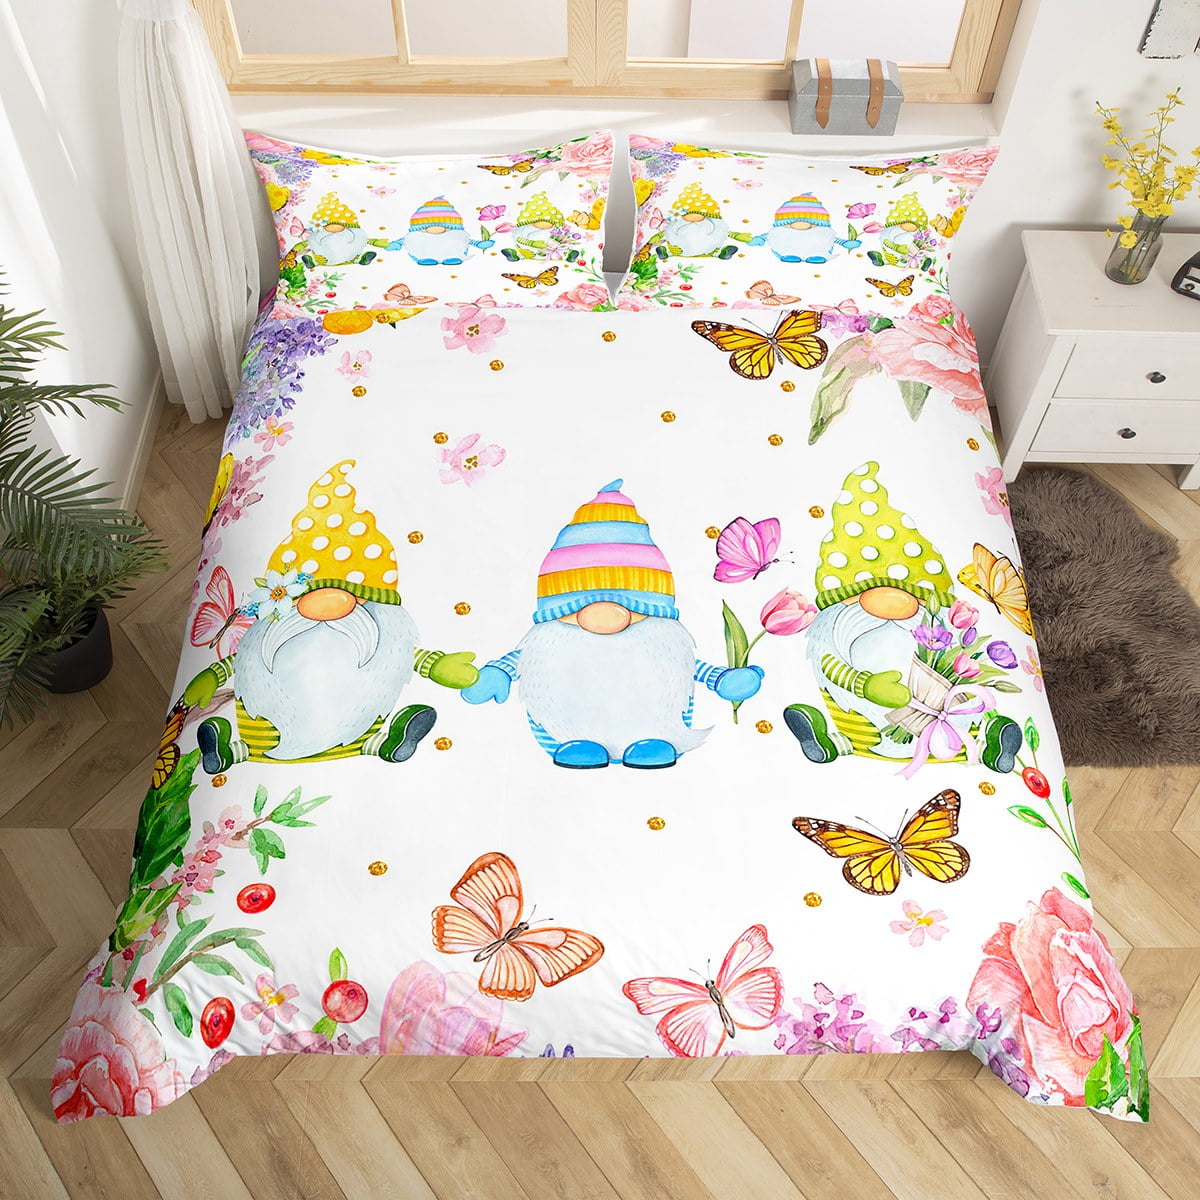 Spring Flower Duvet Cover Gnomes Bedding Sets Queen Size Colorful ...